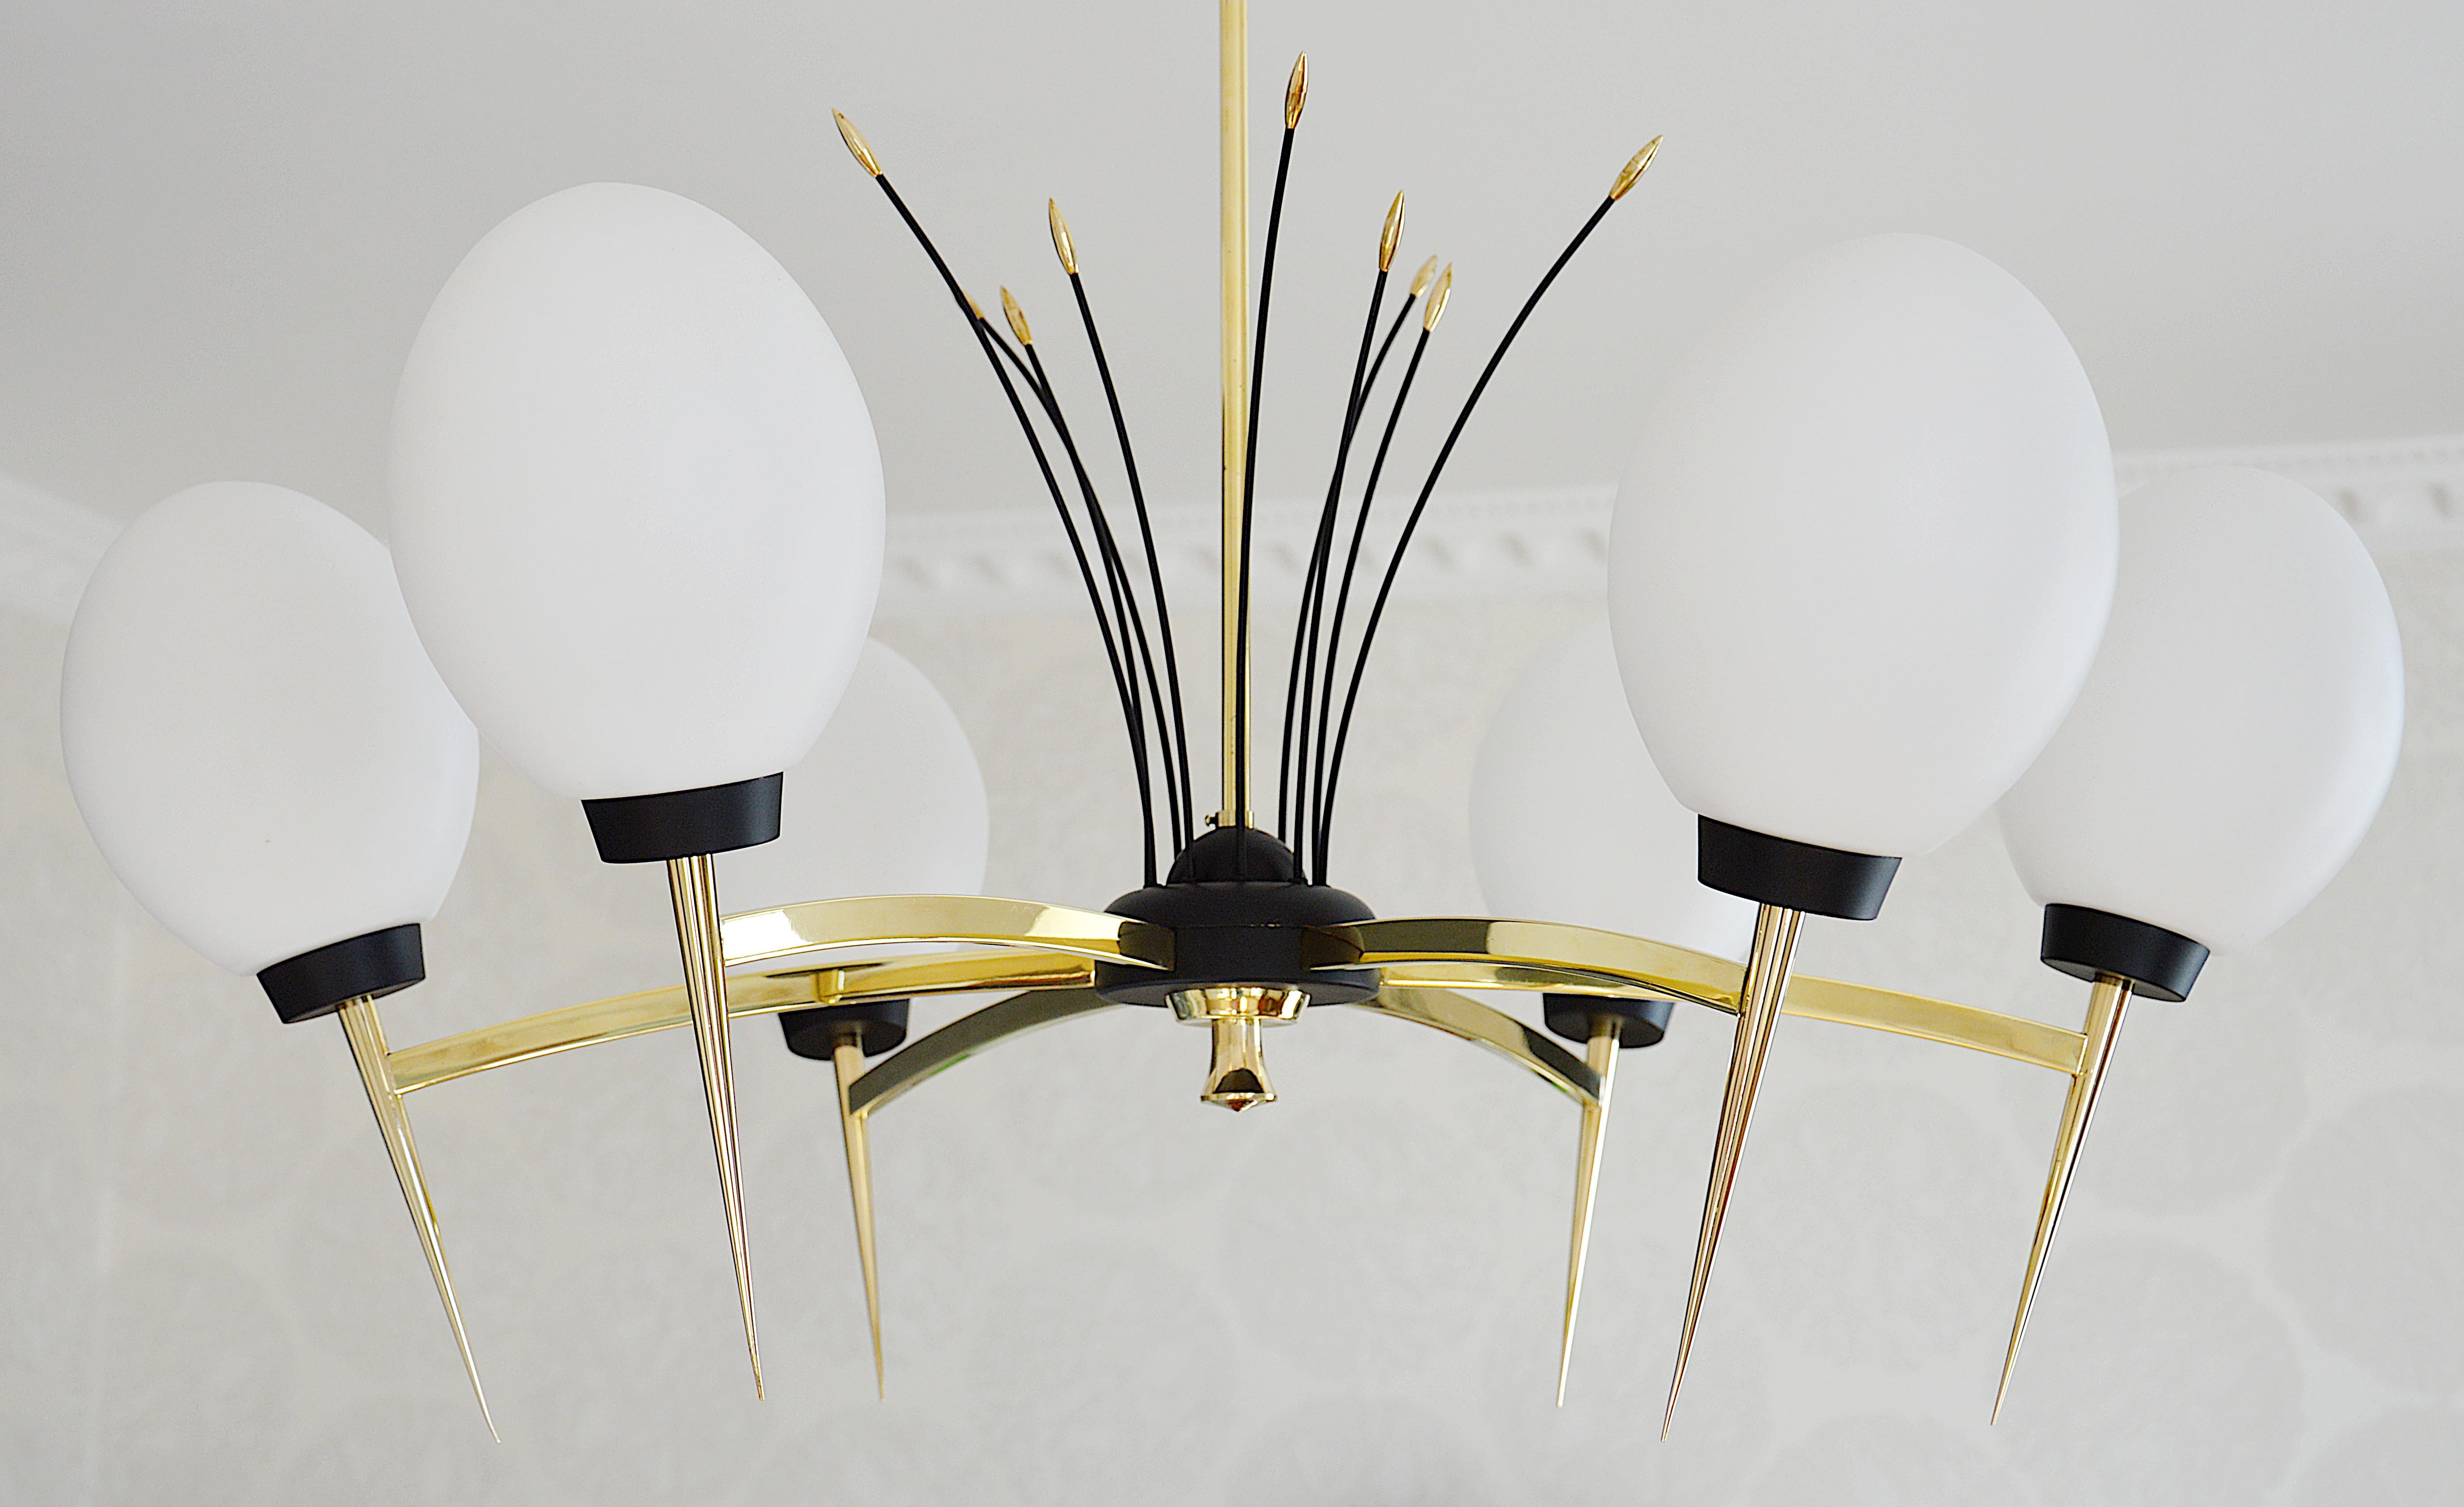 Lunel Gorgeous French Midcentury Chandelier, 1950s For Sale 1